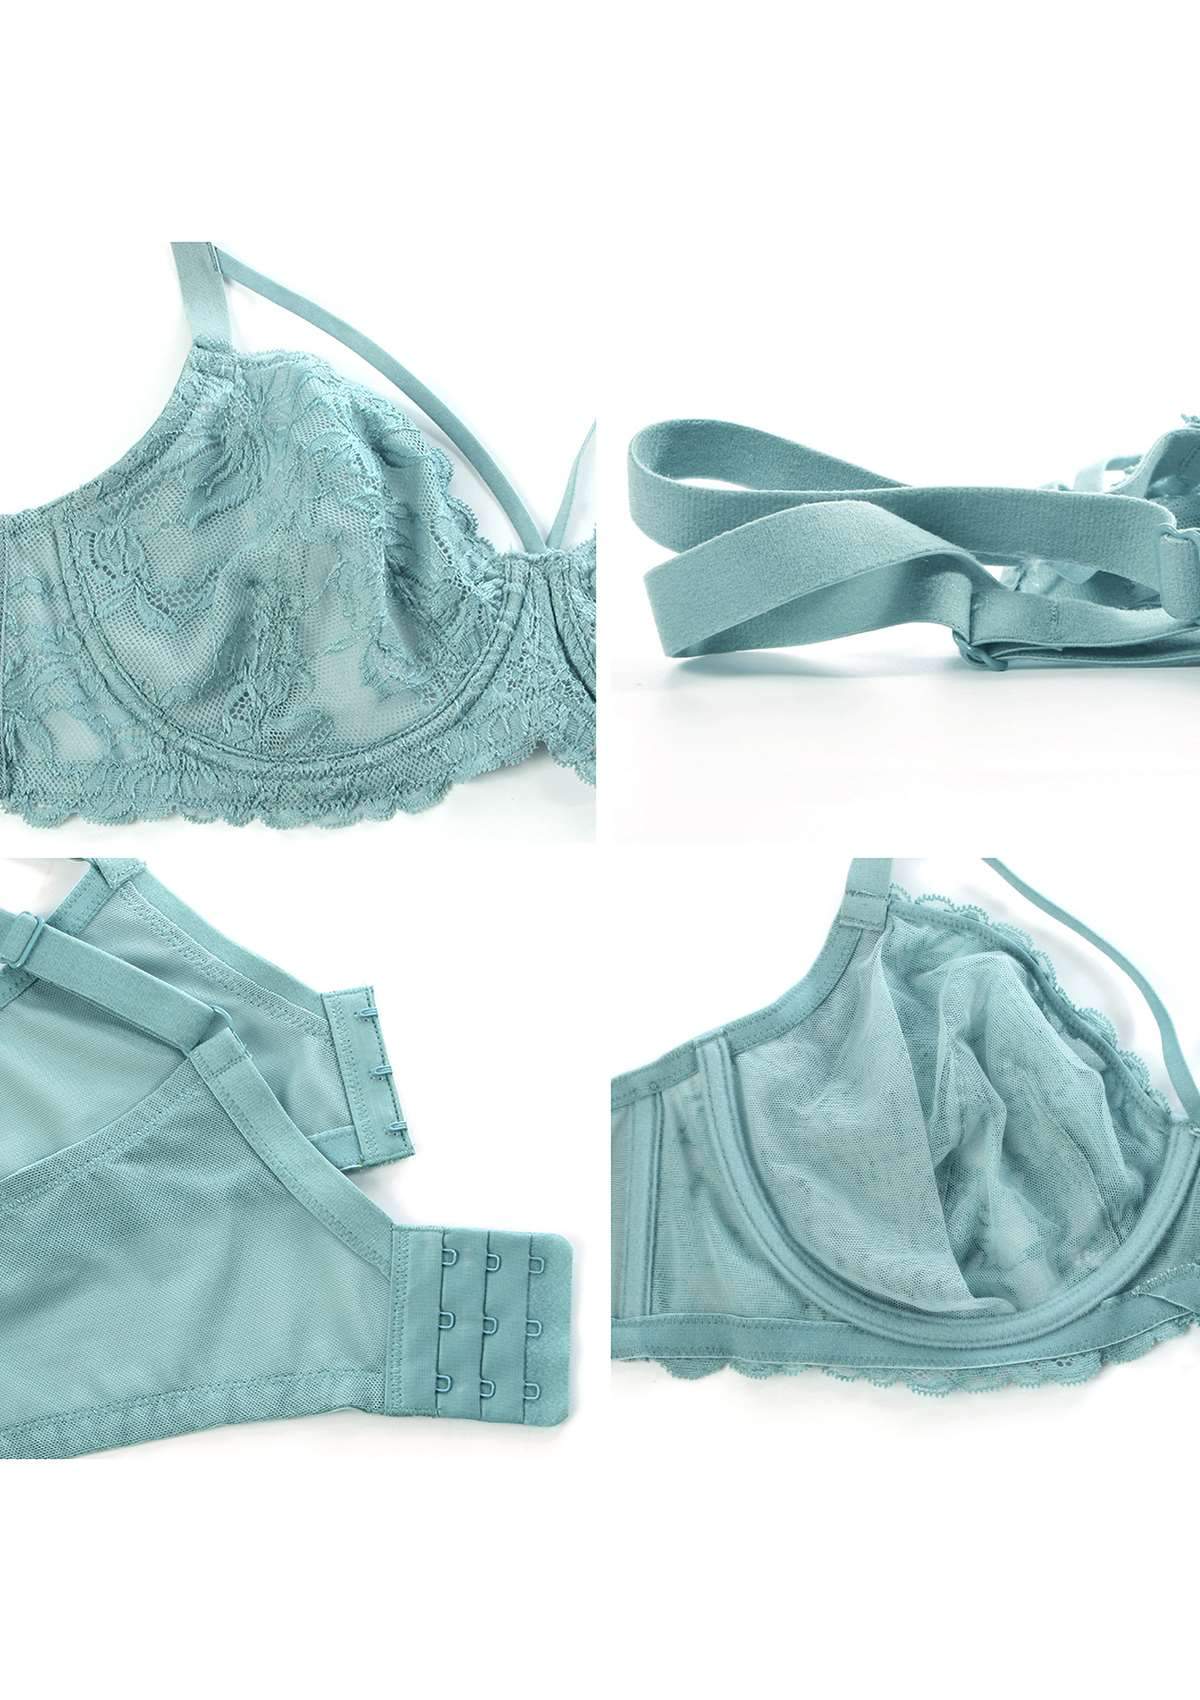 HSIA Pretty In Petals Unlined Lace Bra: Comfortable And Supportive Bra - Pewter Blue / 38 / D